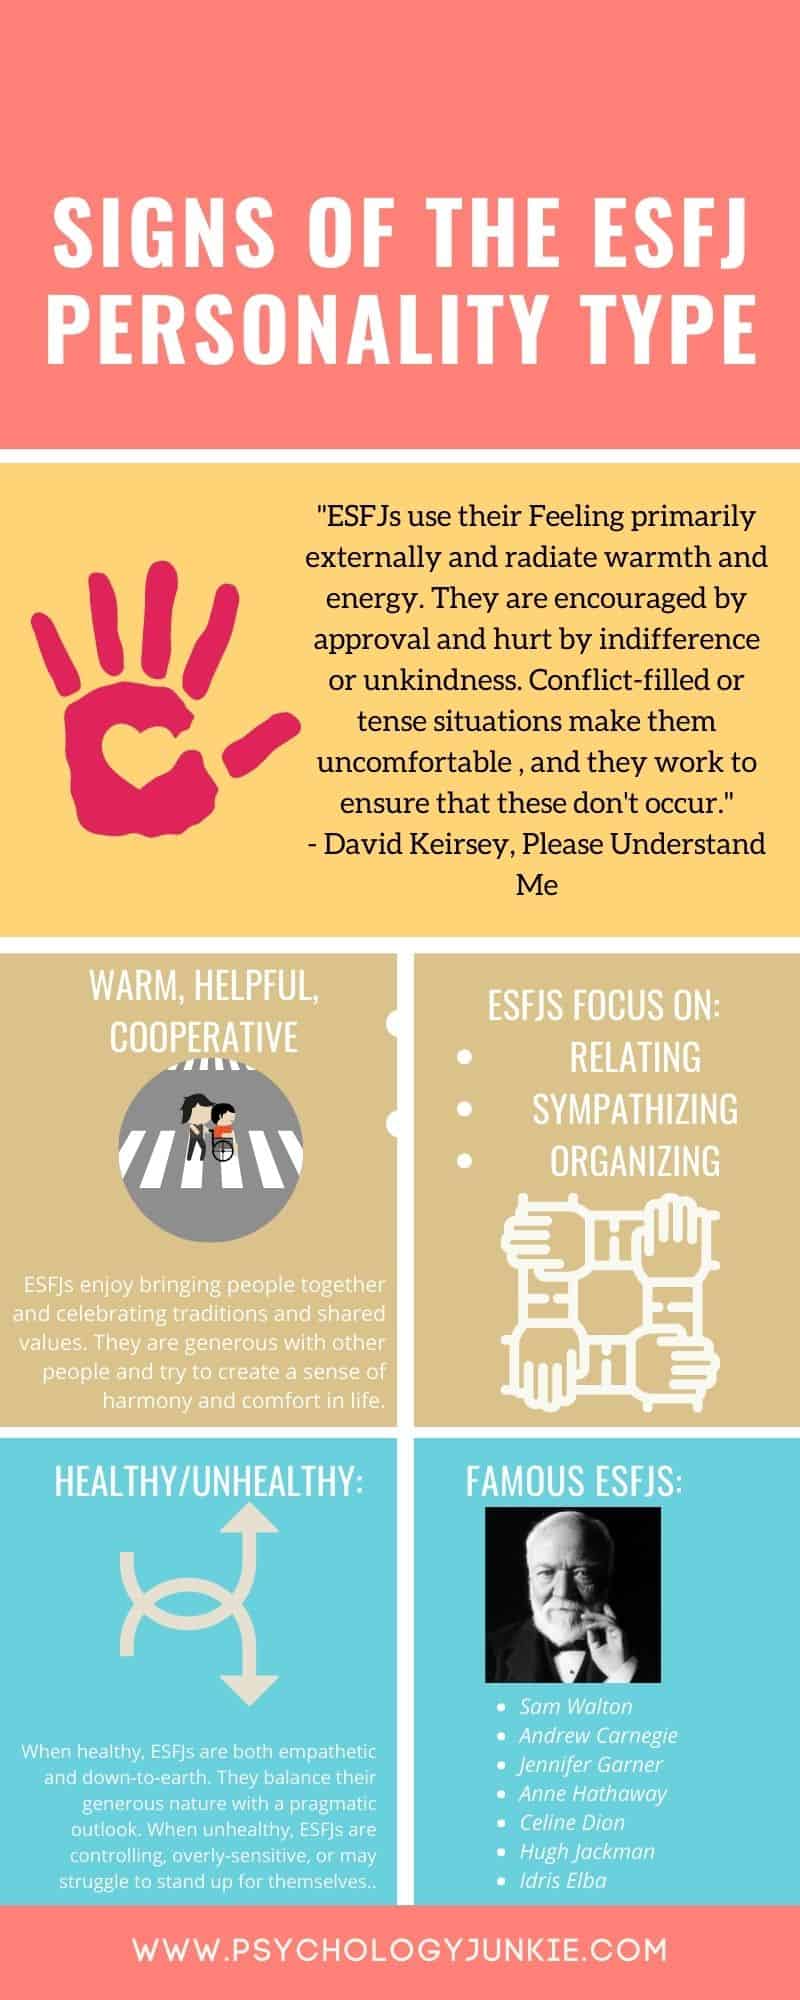 An infographic about the #ESFJ personality type. #Personality